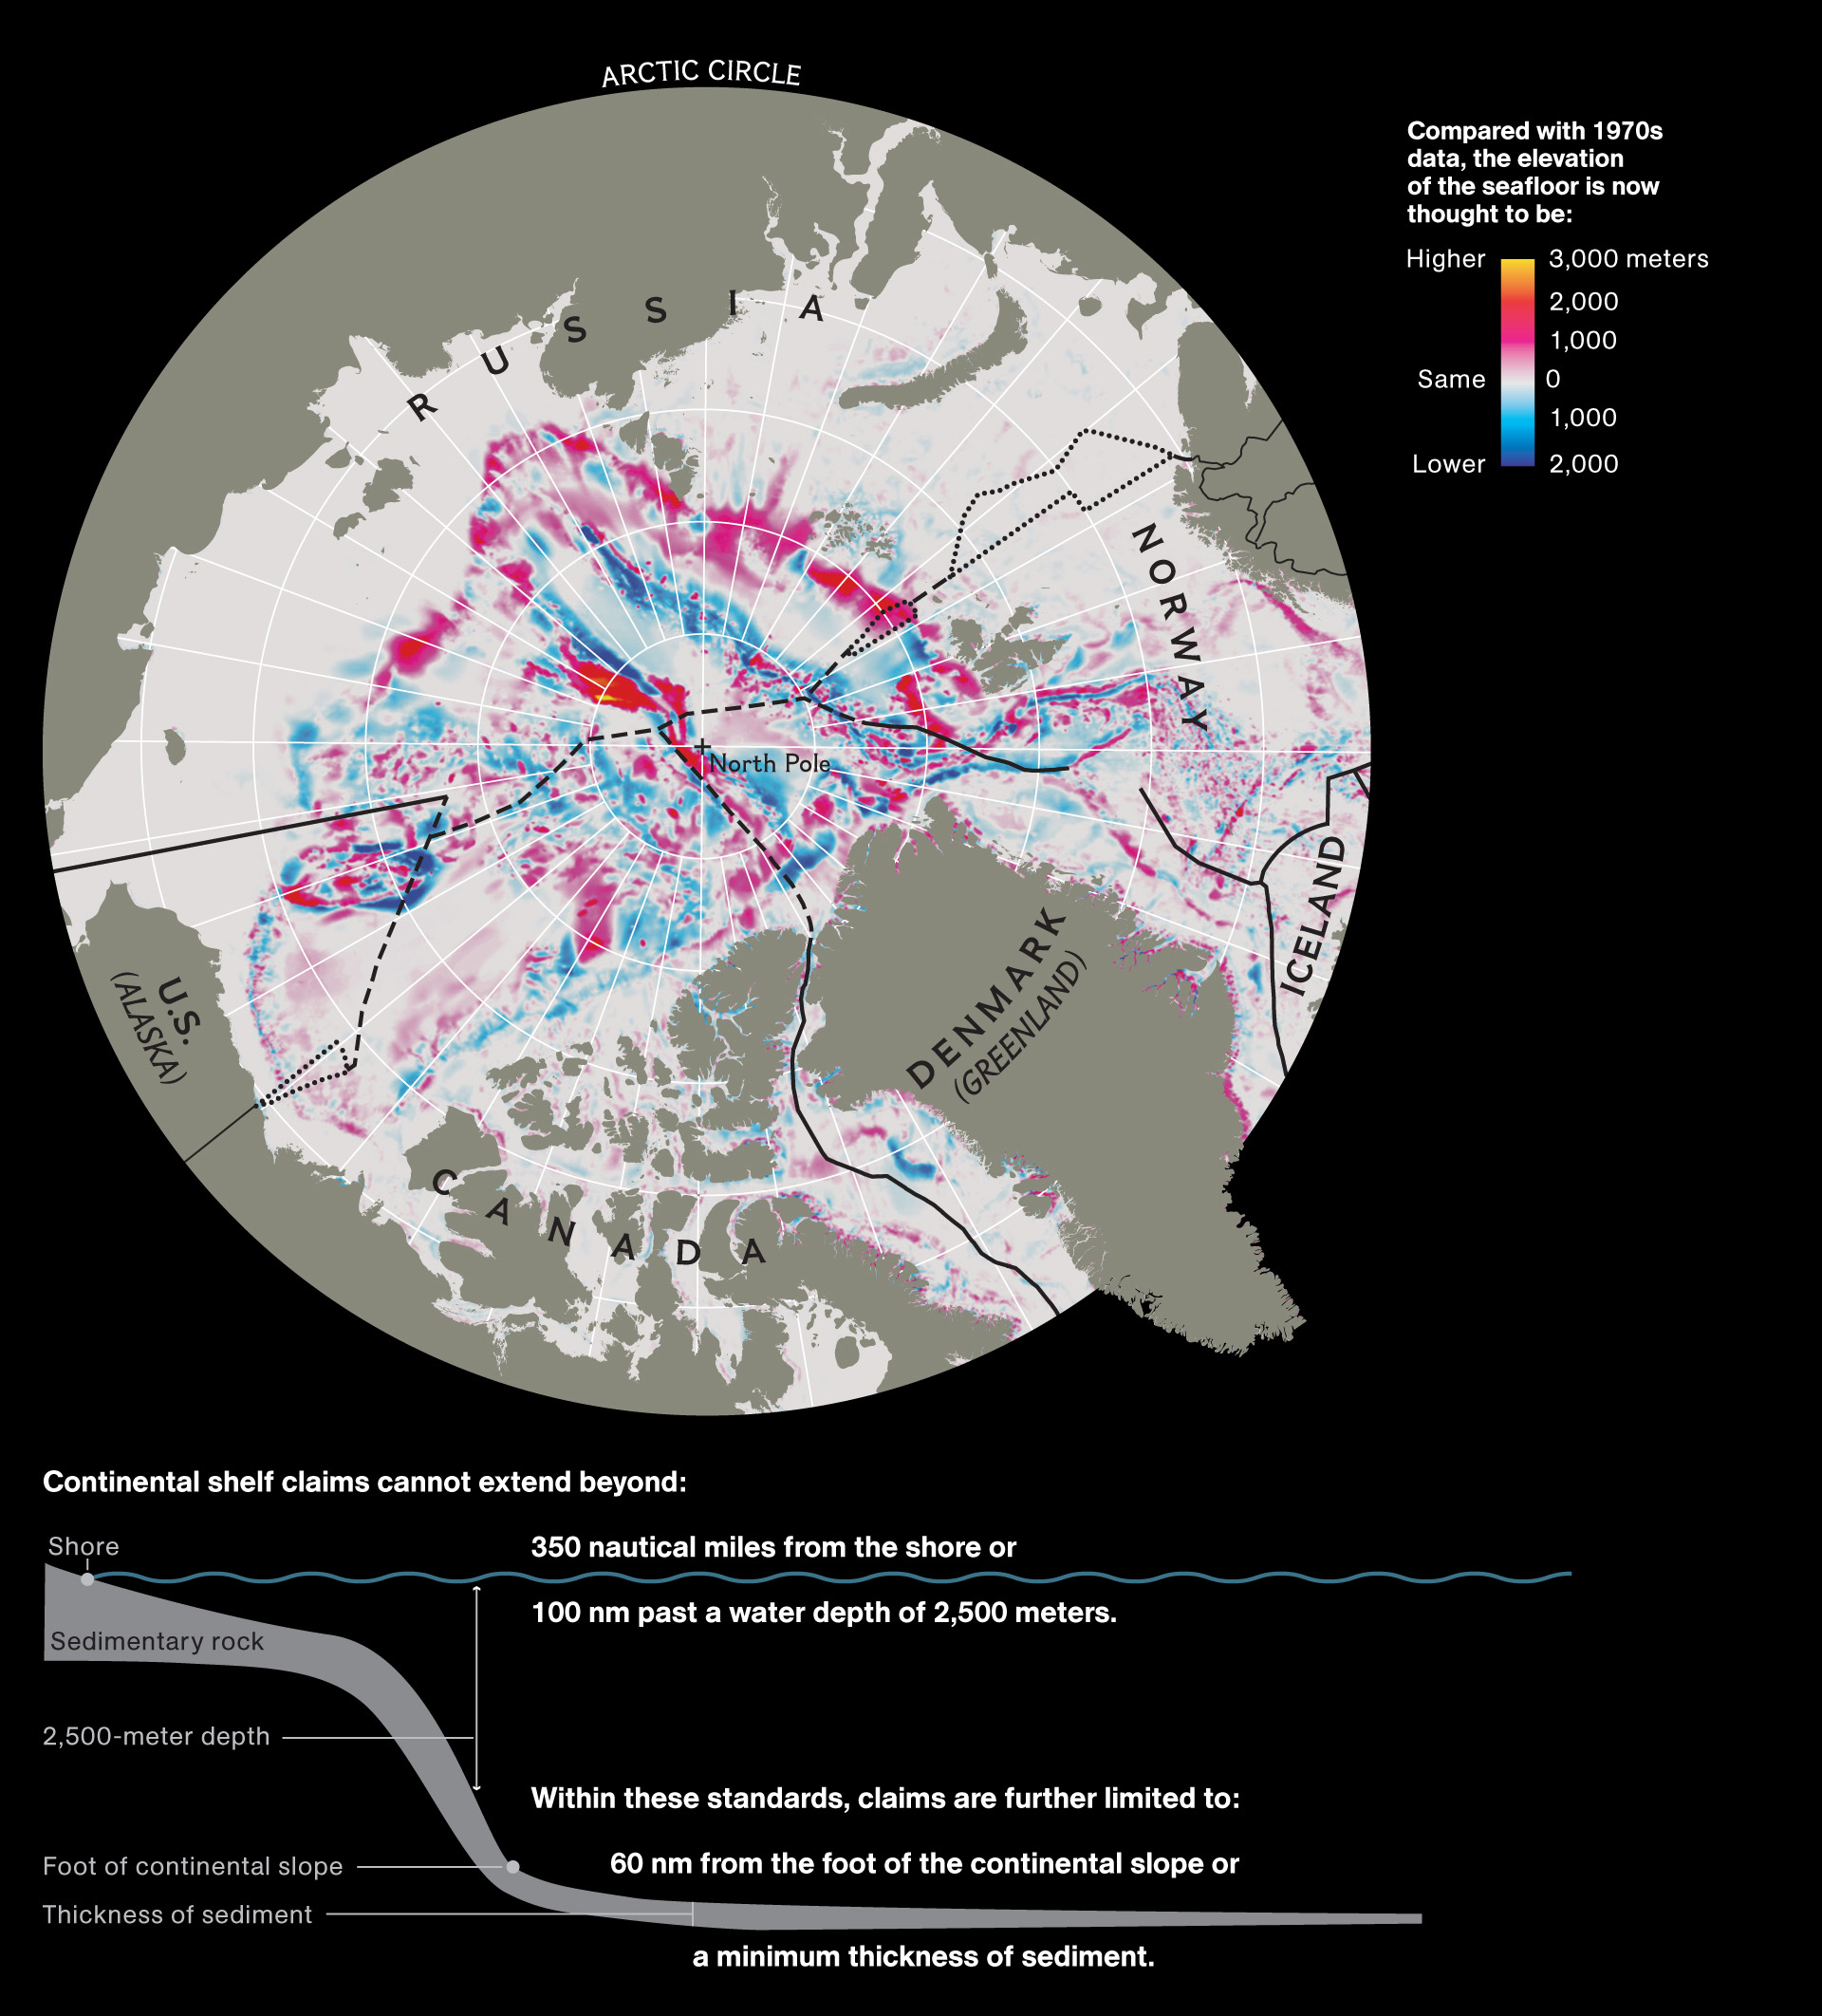 Geography, Climate and Species of Earth's Arctic Region